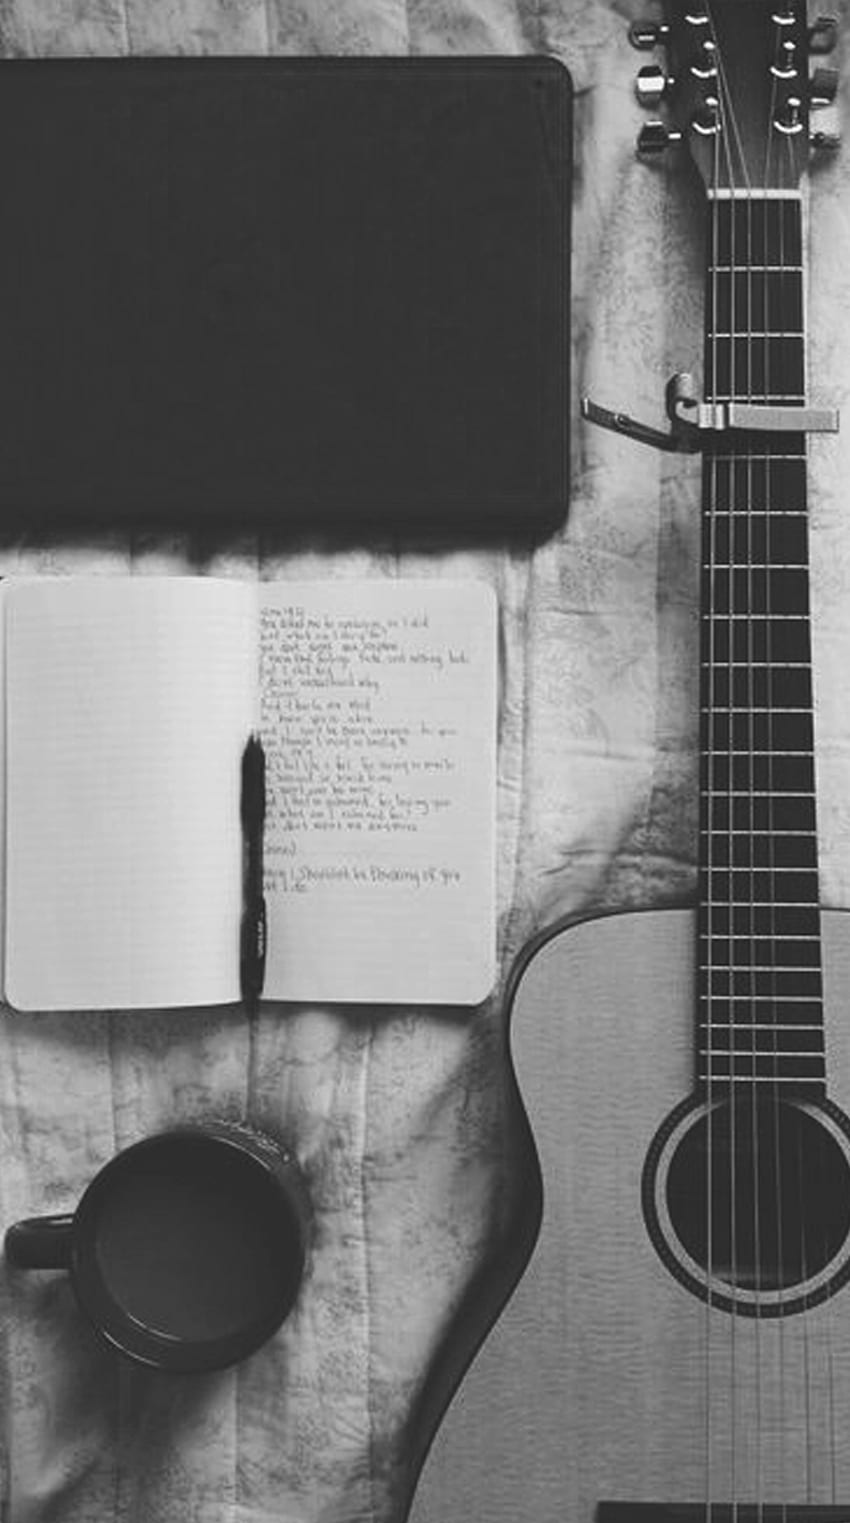 An open notebook with lyrics written in pen, a pen, a cup of coffee, and a guitar. - Guitar